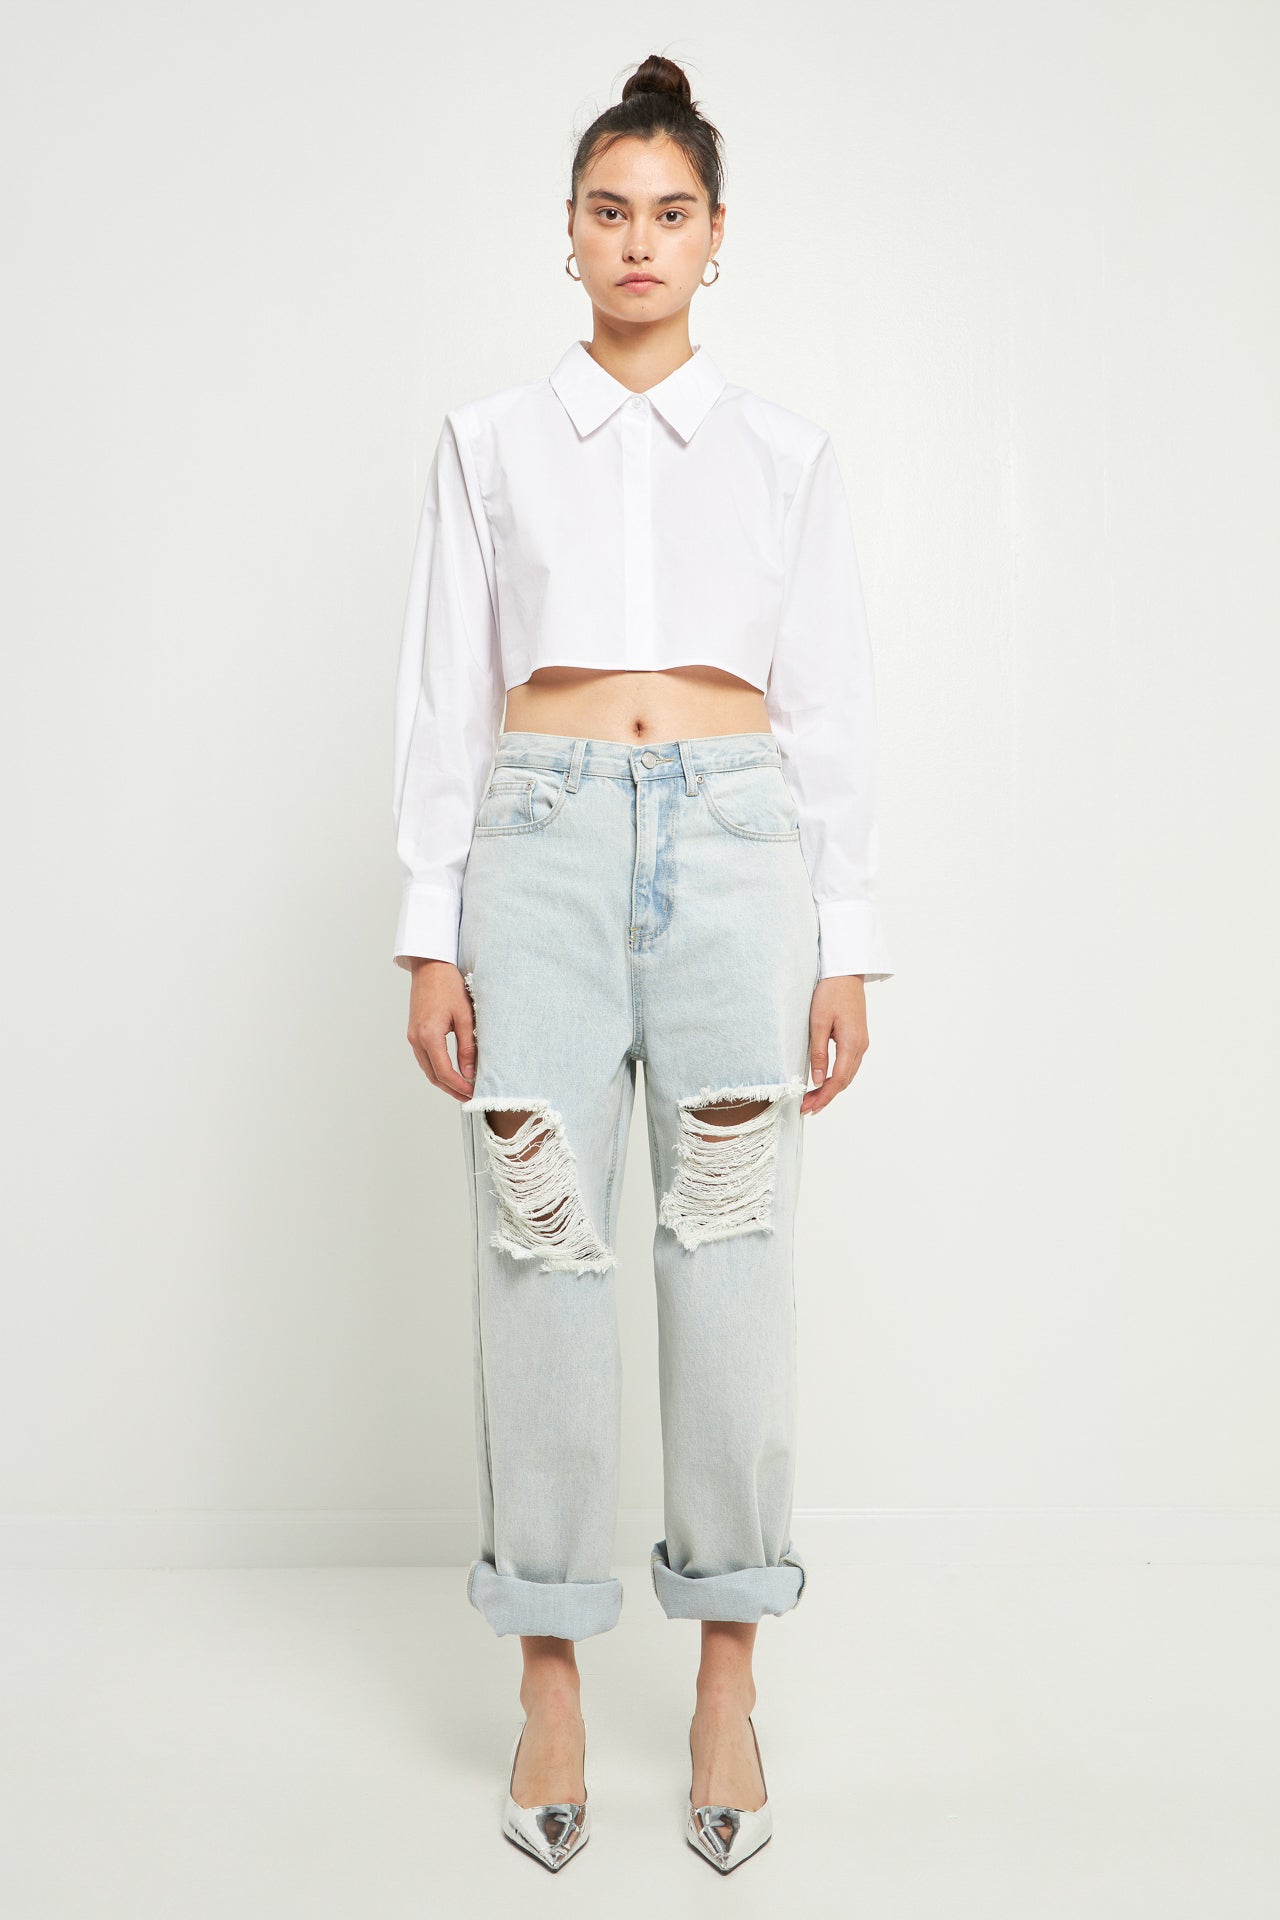 GREY LAB - Shoulder Pad Cropped Shirt - SHIRTS & BLOUSES available at Objectrare